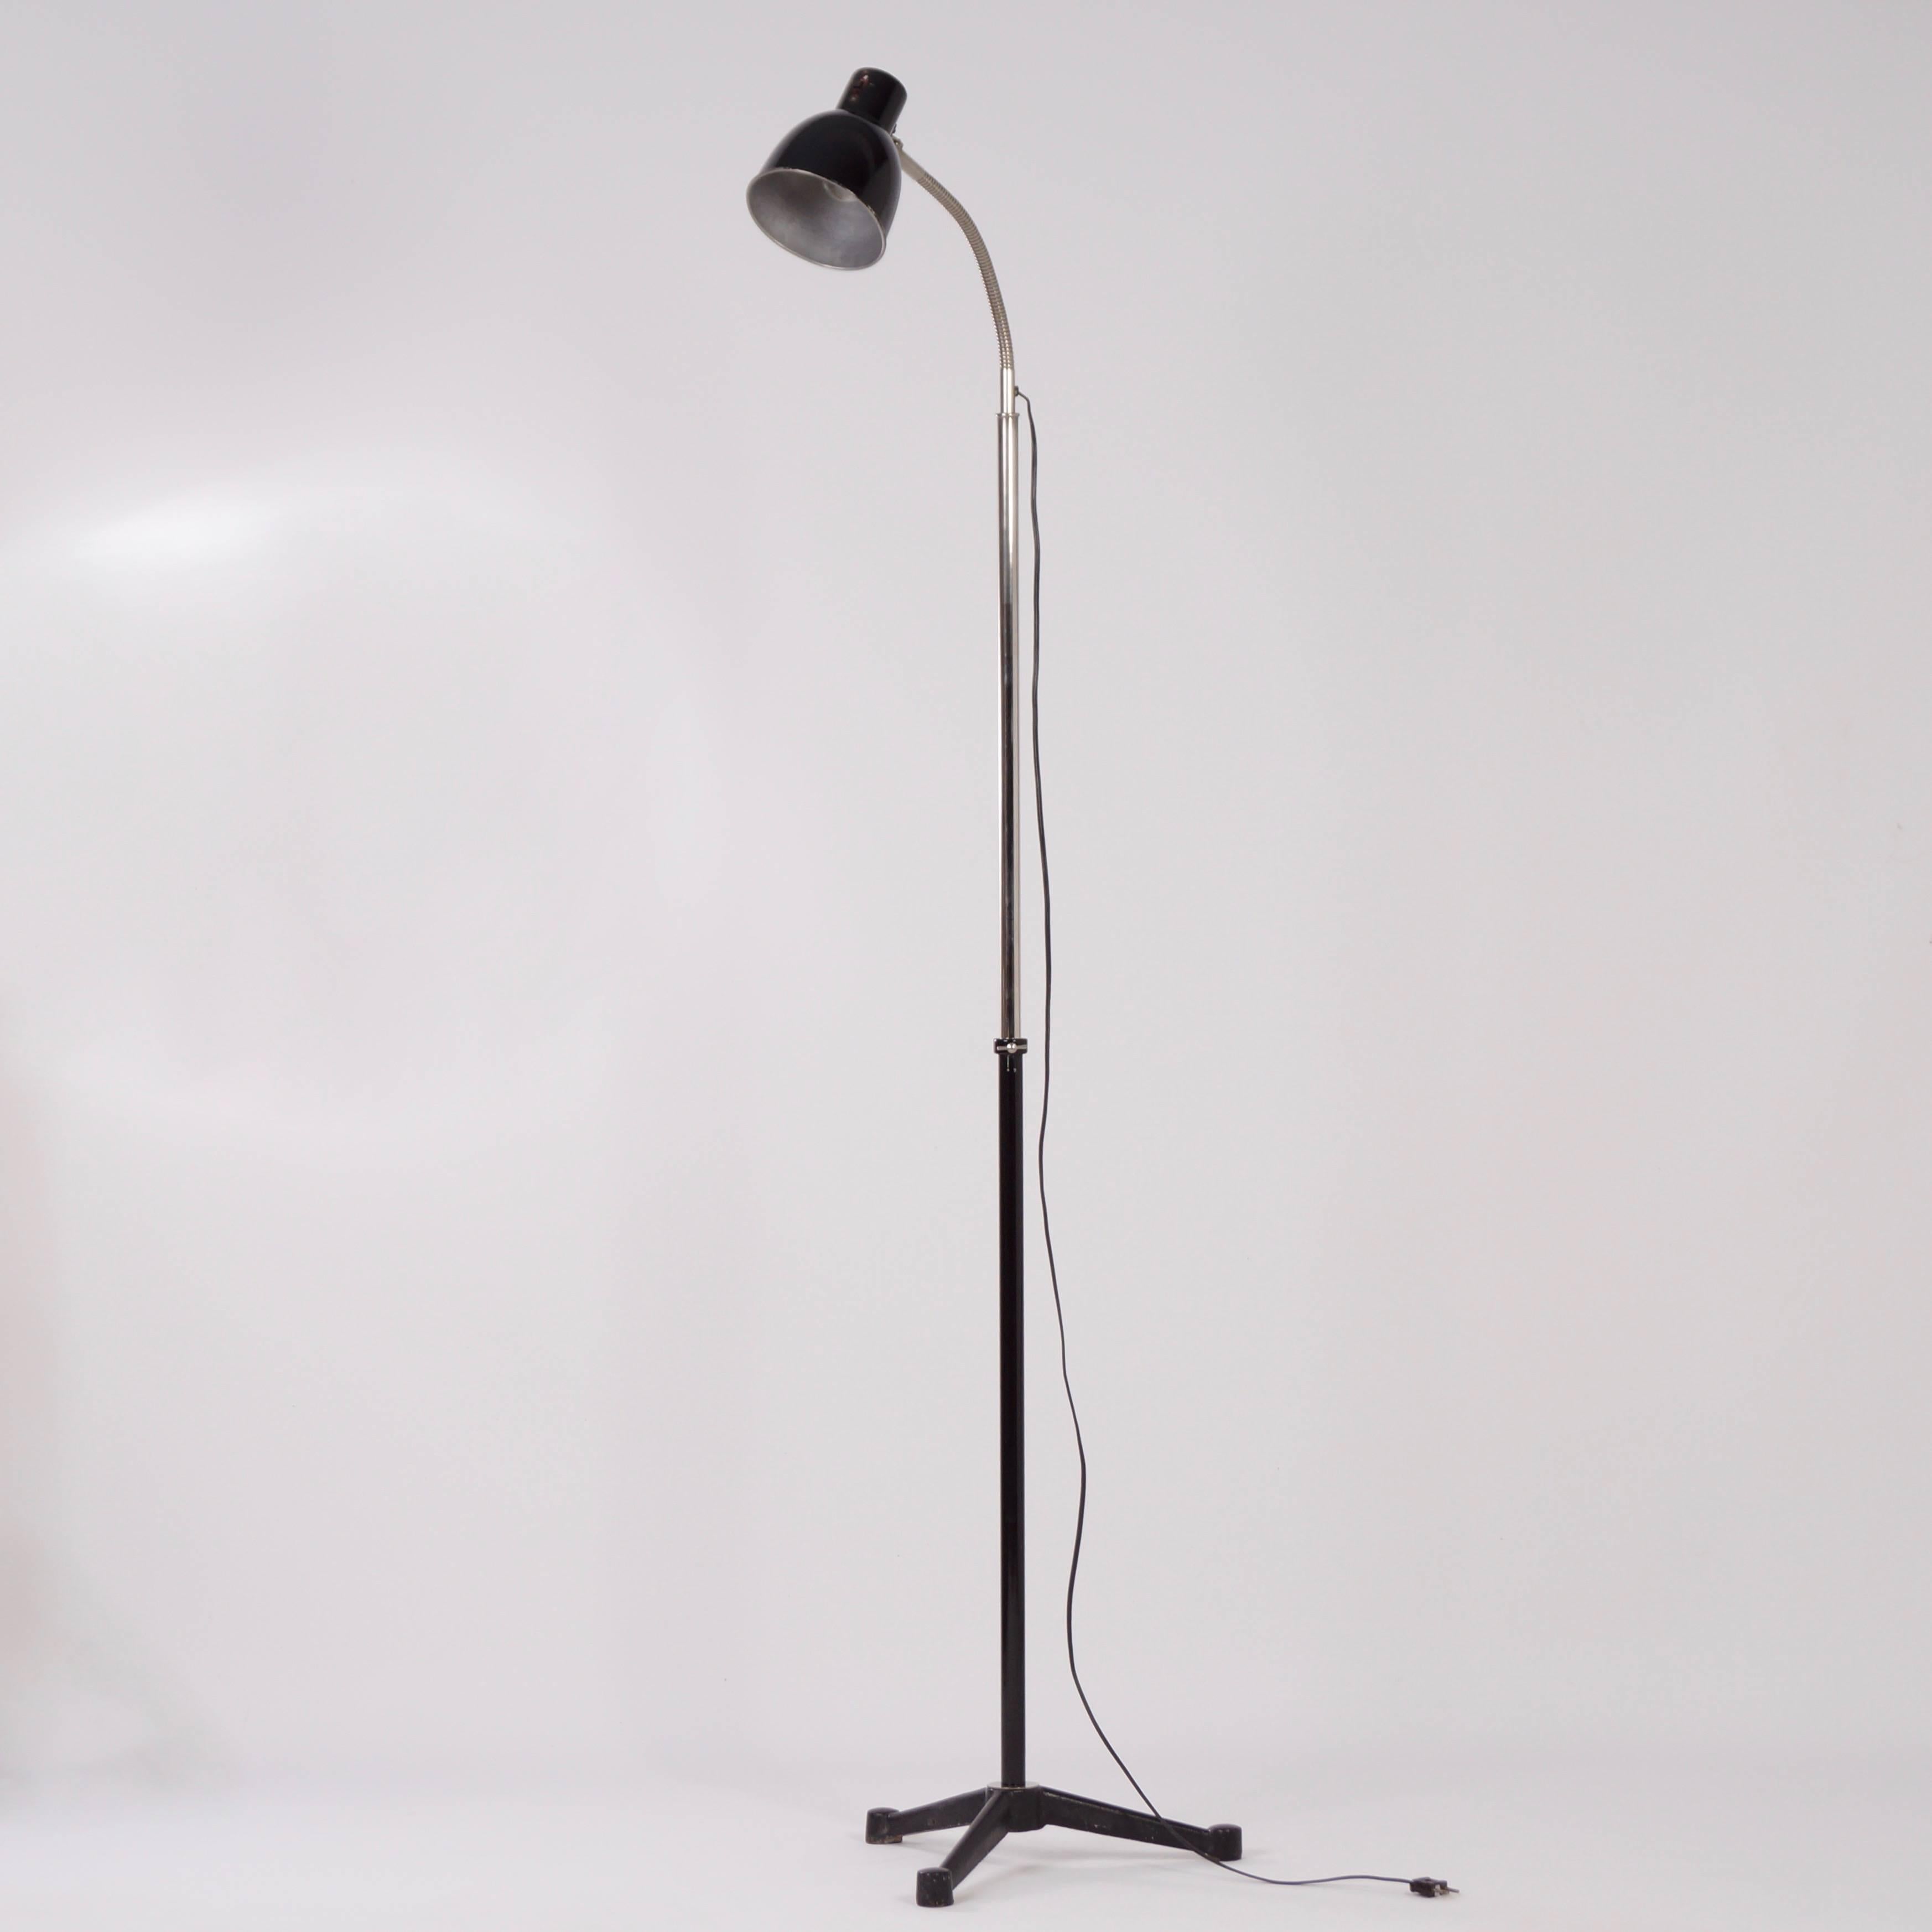 Industrial hala floor lamp designed by H. Busquet in the 1950s. This vintage Hala floor lamp has a nice tripod base that is adjustable in height of 123–184 cm. The shade is adjustable by the flexible arm. The lamp can be switched by a switch on the